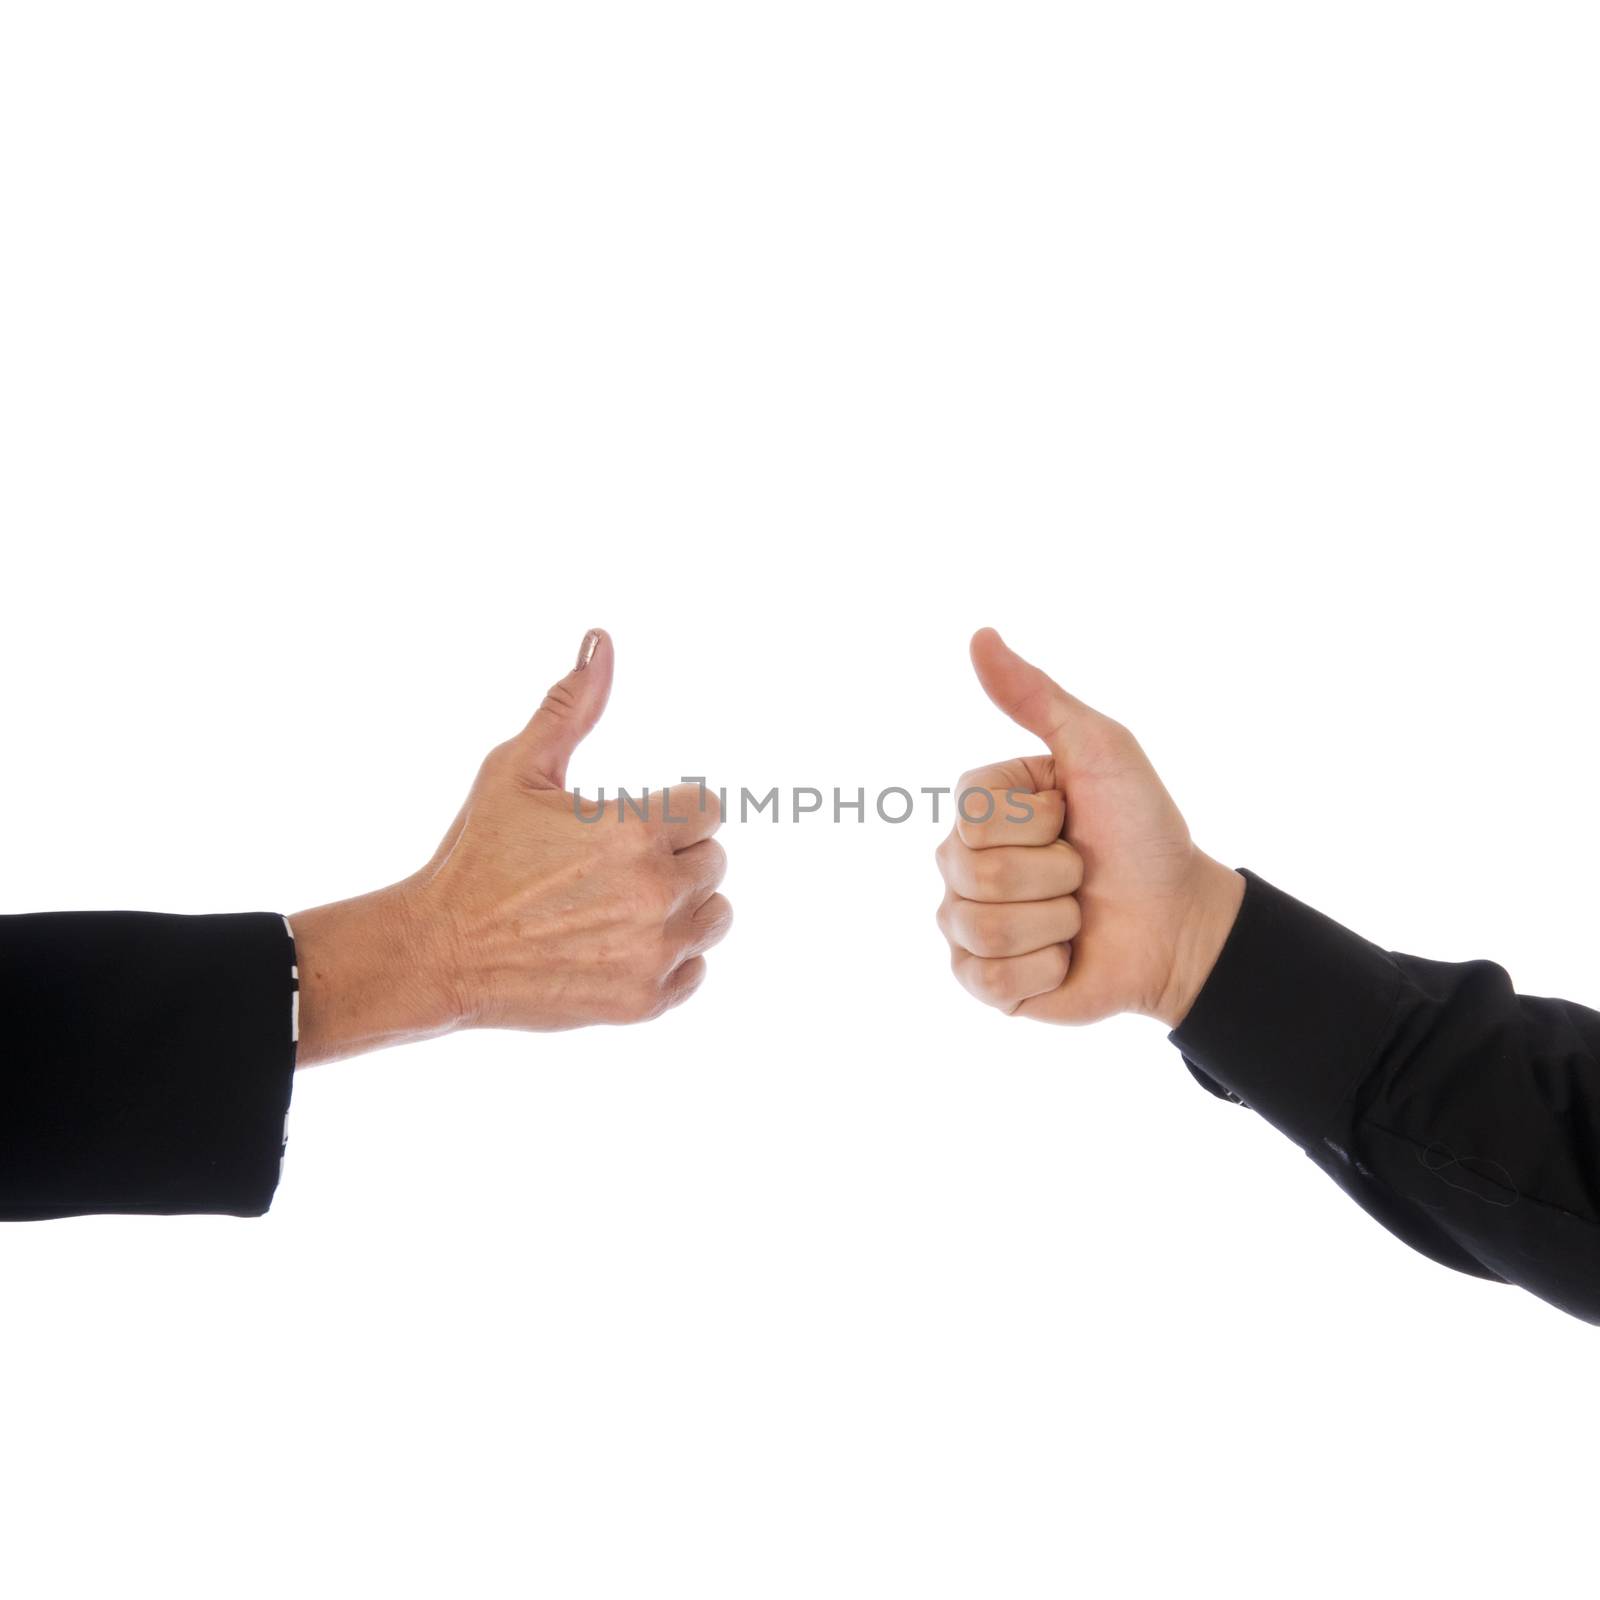 Hands of a man and a woman giving a thumbs up to show agreement.